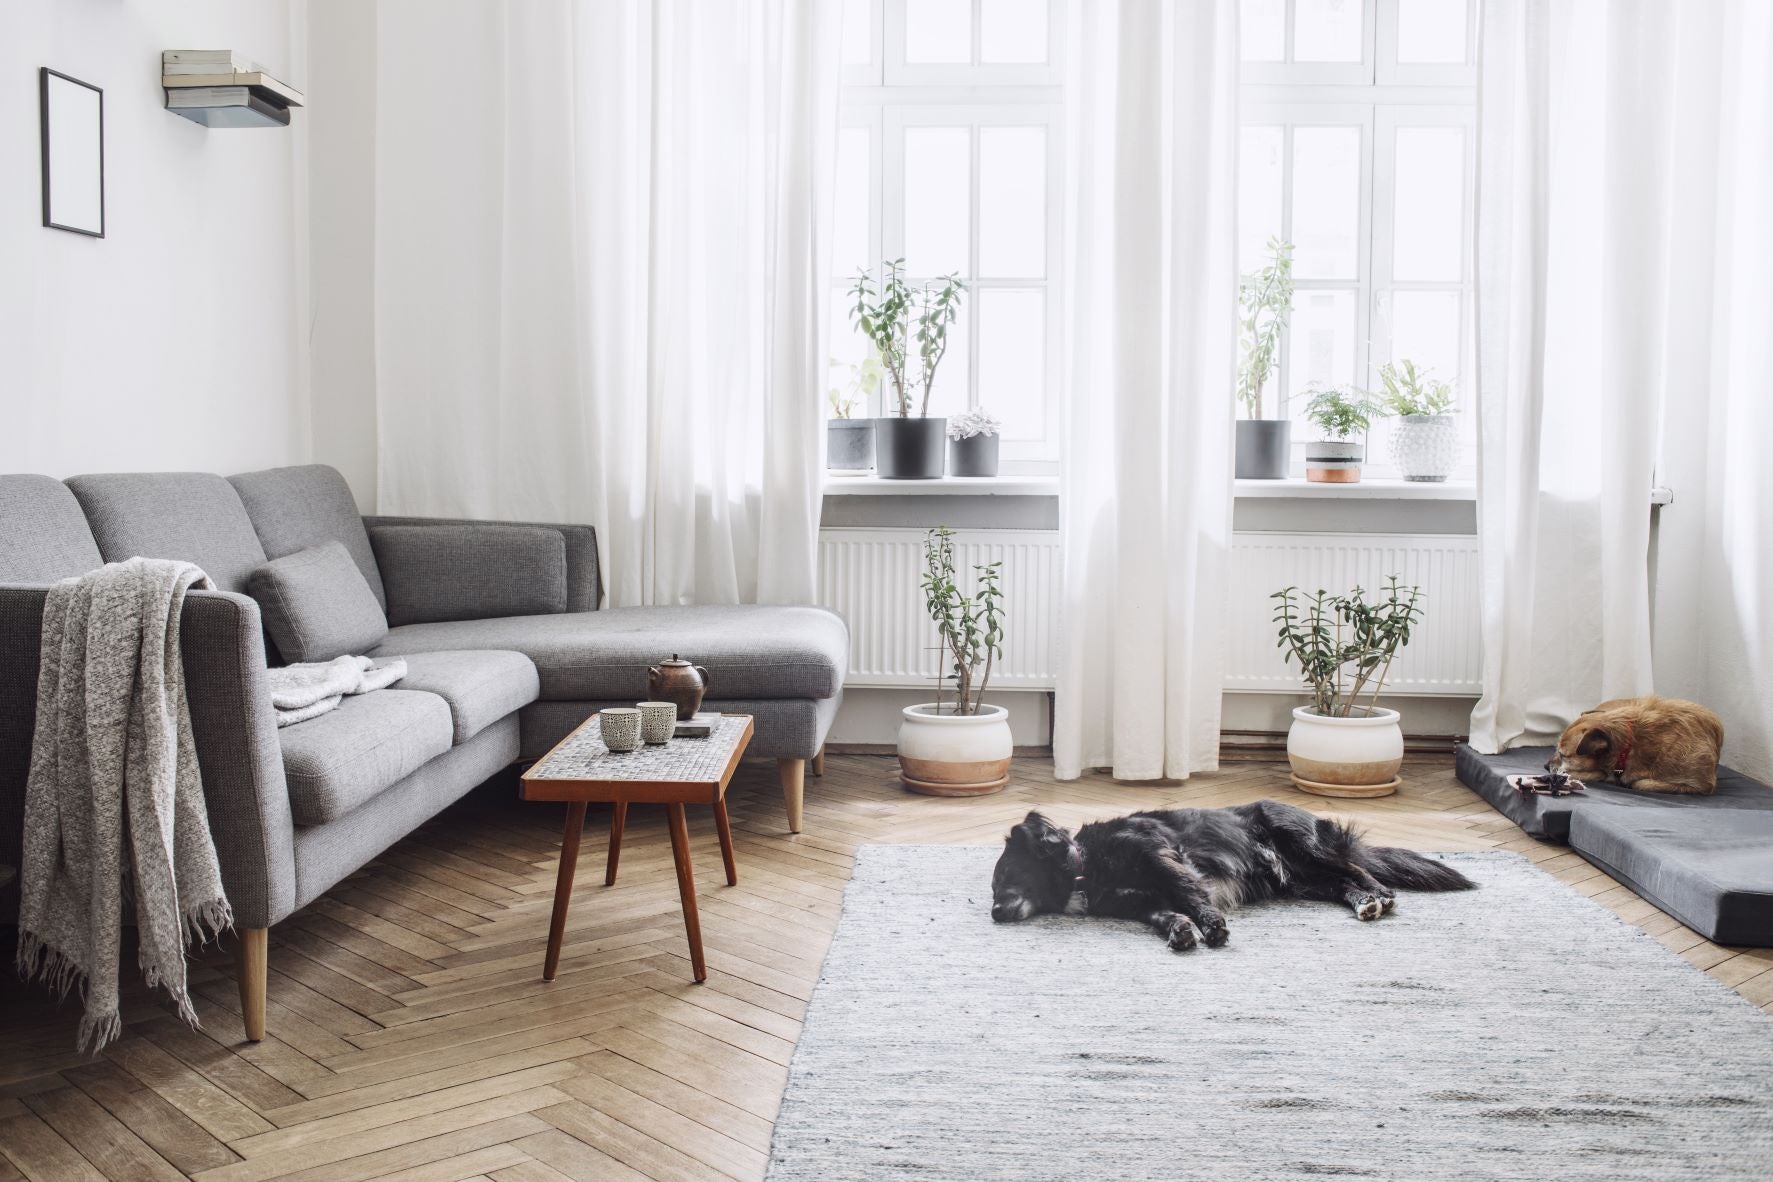 a nice living room with a dog lying on carpet - Nutroz Ozone Technology